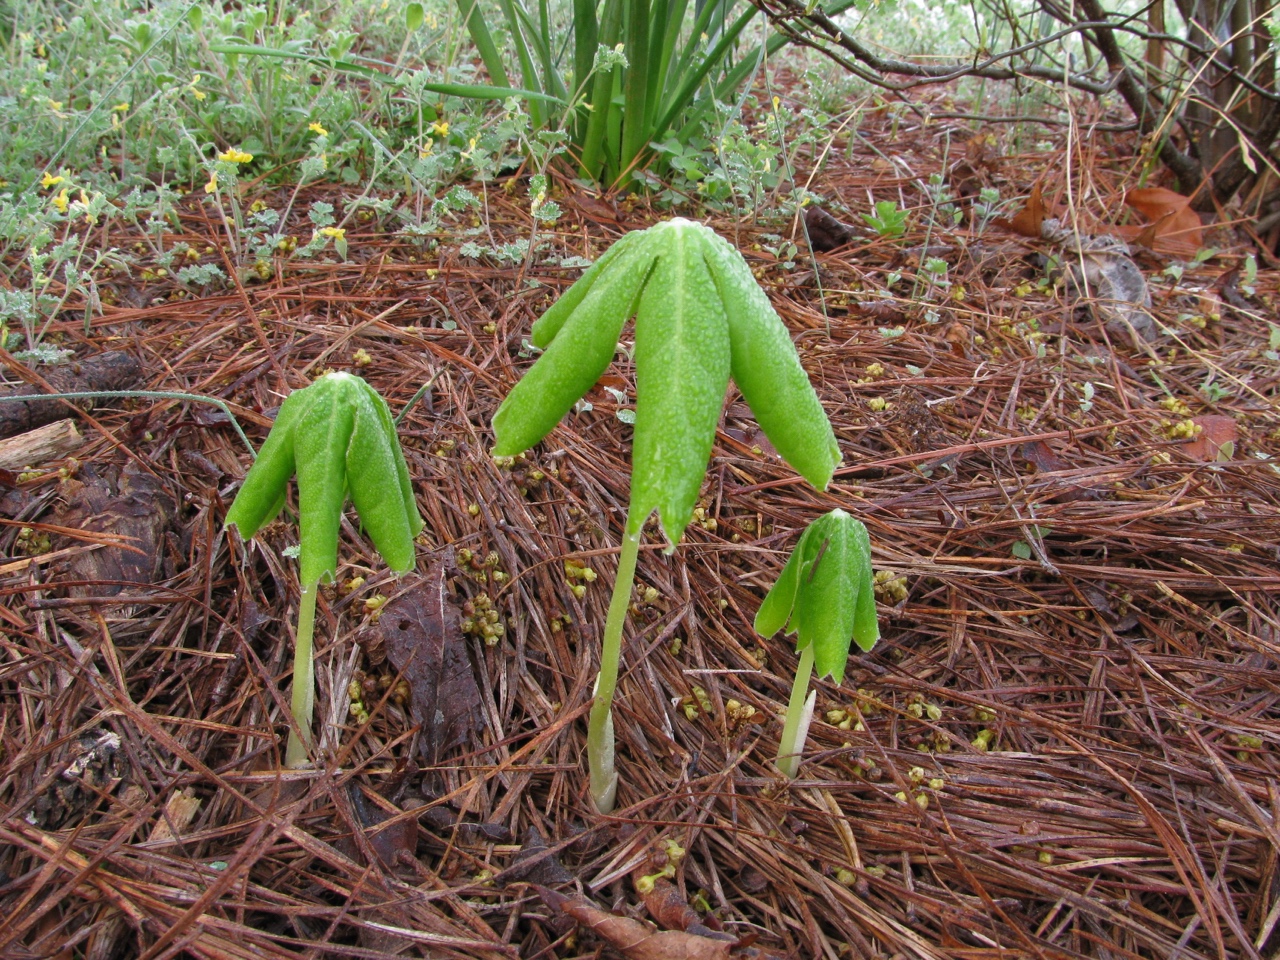 The Scientific Name is Podophyllum peltatum. You will likely hear them called Mayapple, May-apple, American Mandrake, Wild Mandrake, Indian Apple, Pomme de Mai, Podophylle Pelt. This picture shows the Emergence in early Spring of Podophyllum peltatum